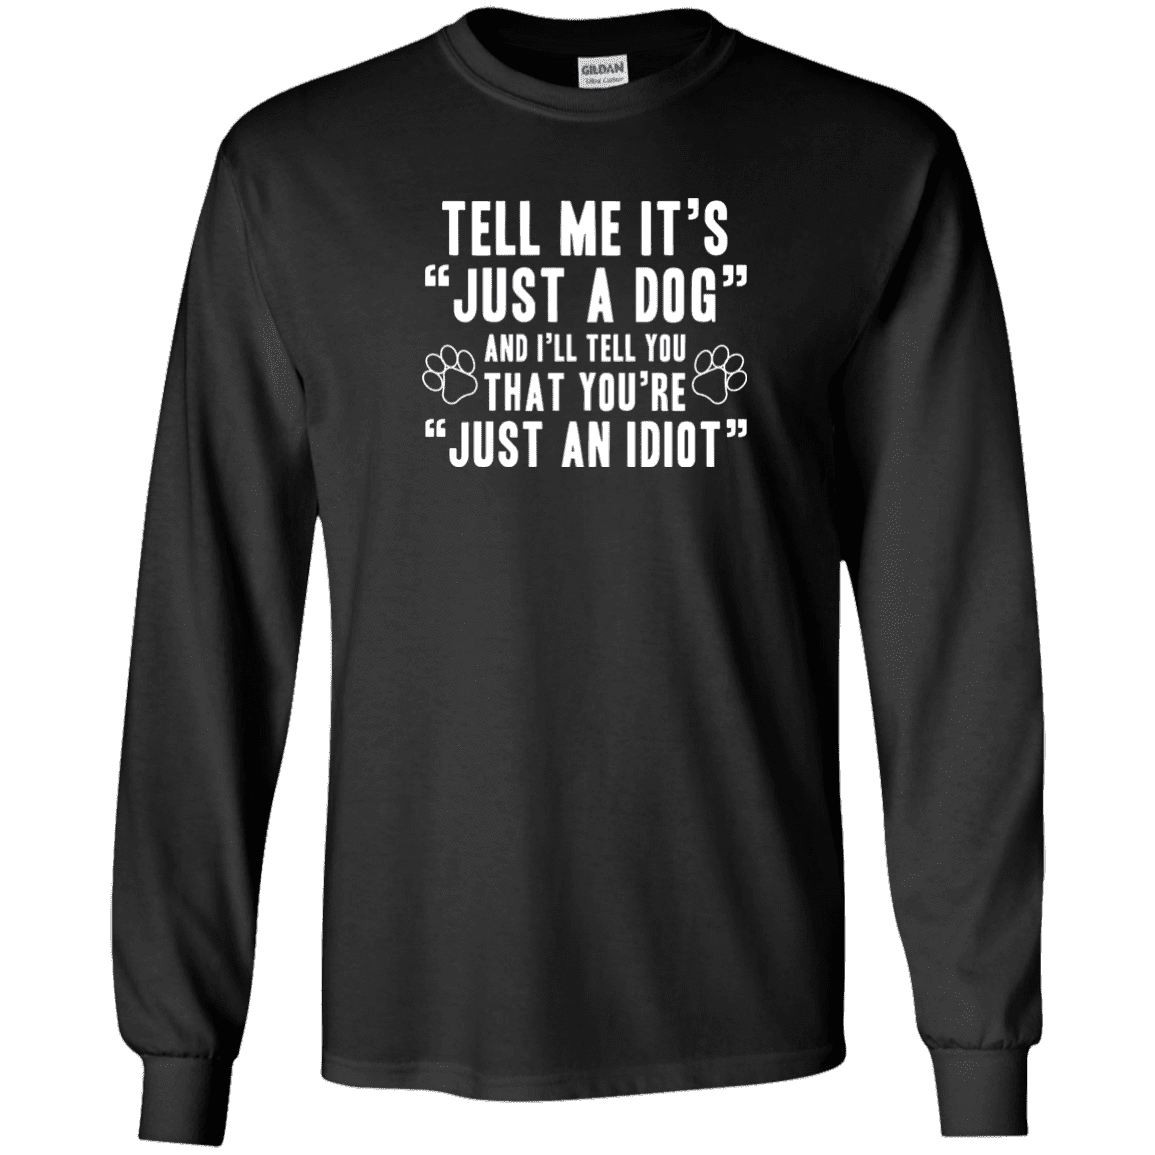 Tell Me It's Just A Dog - Long Sleeve T Shirt.